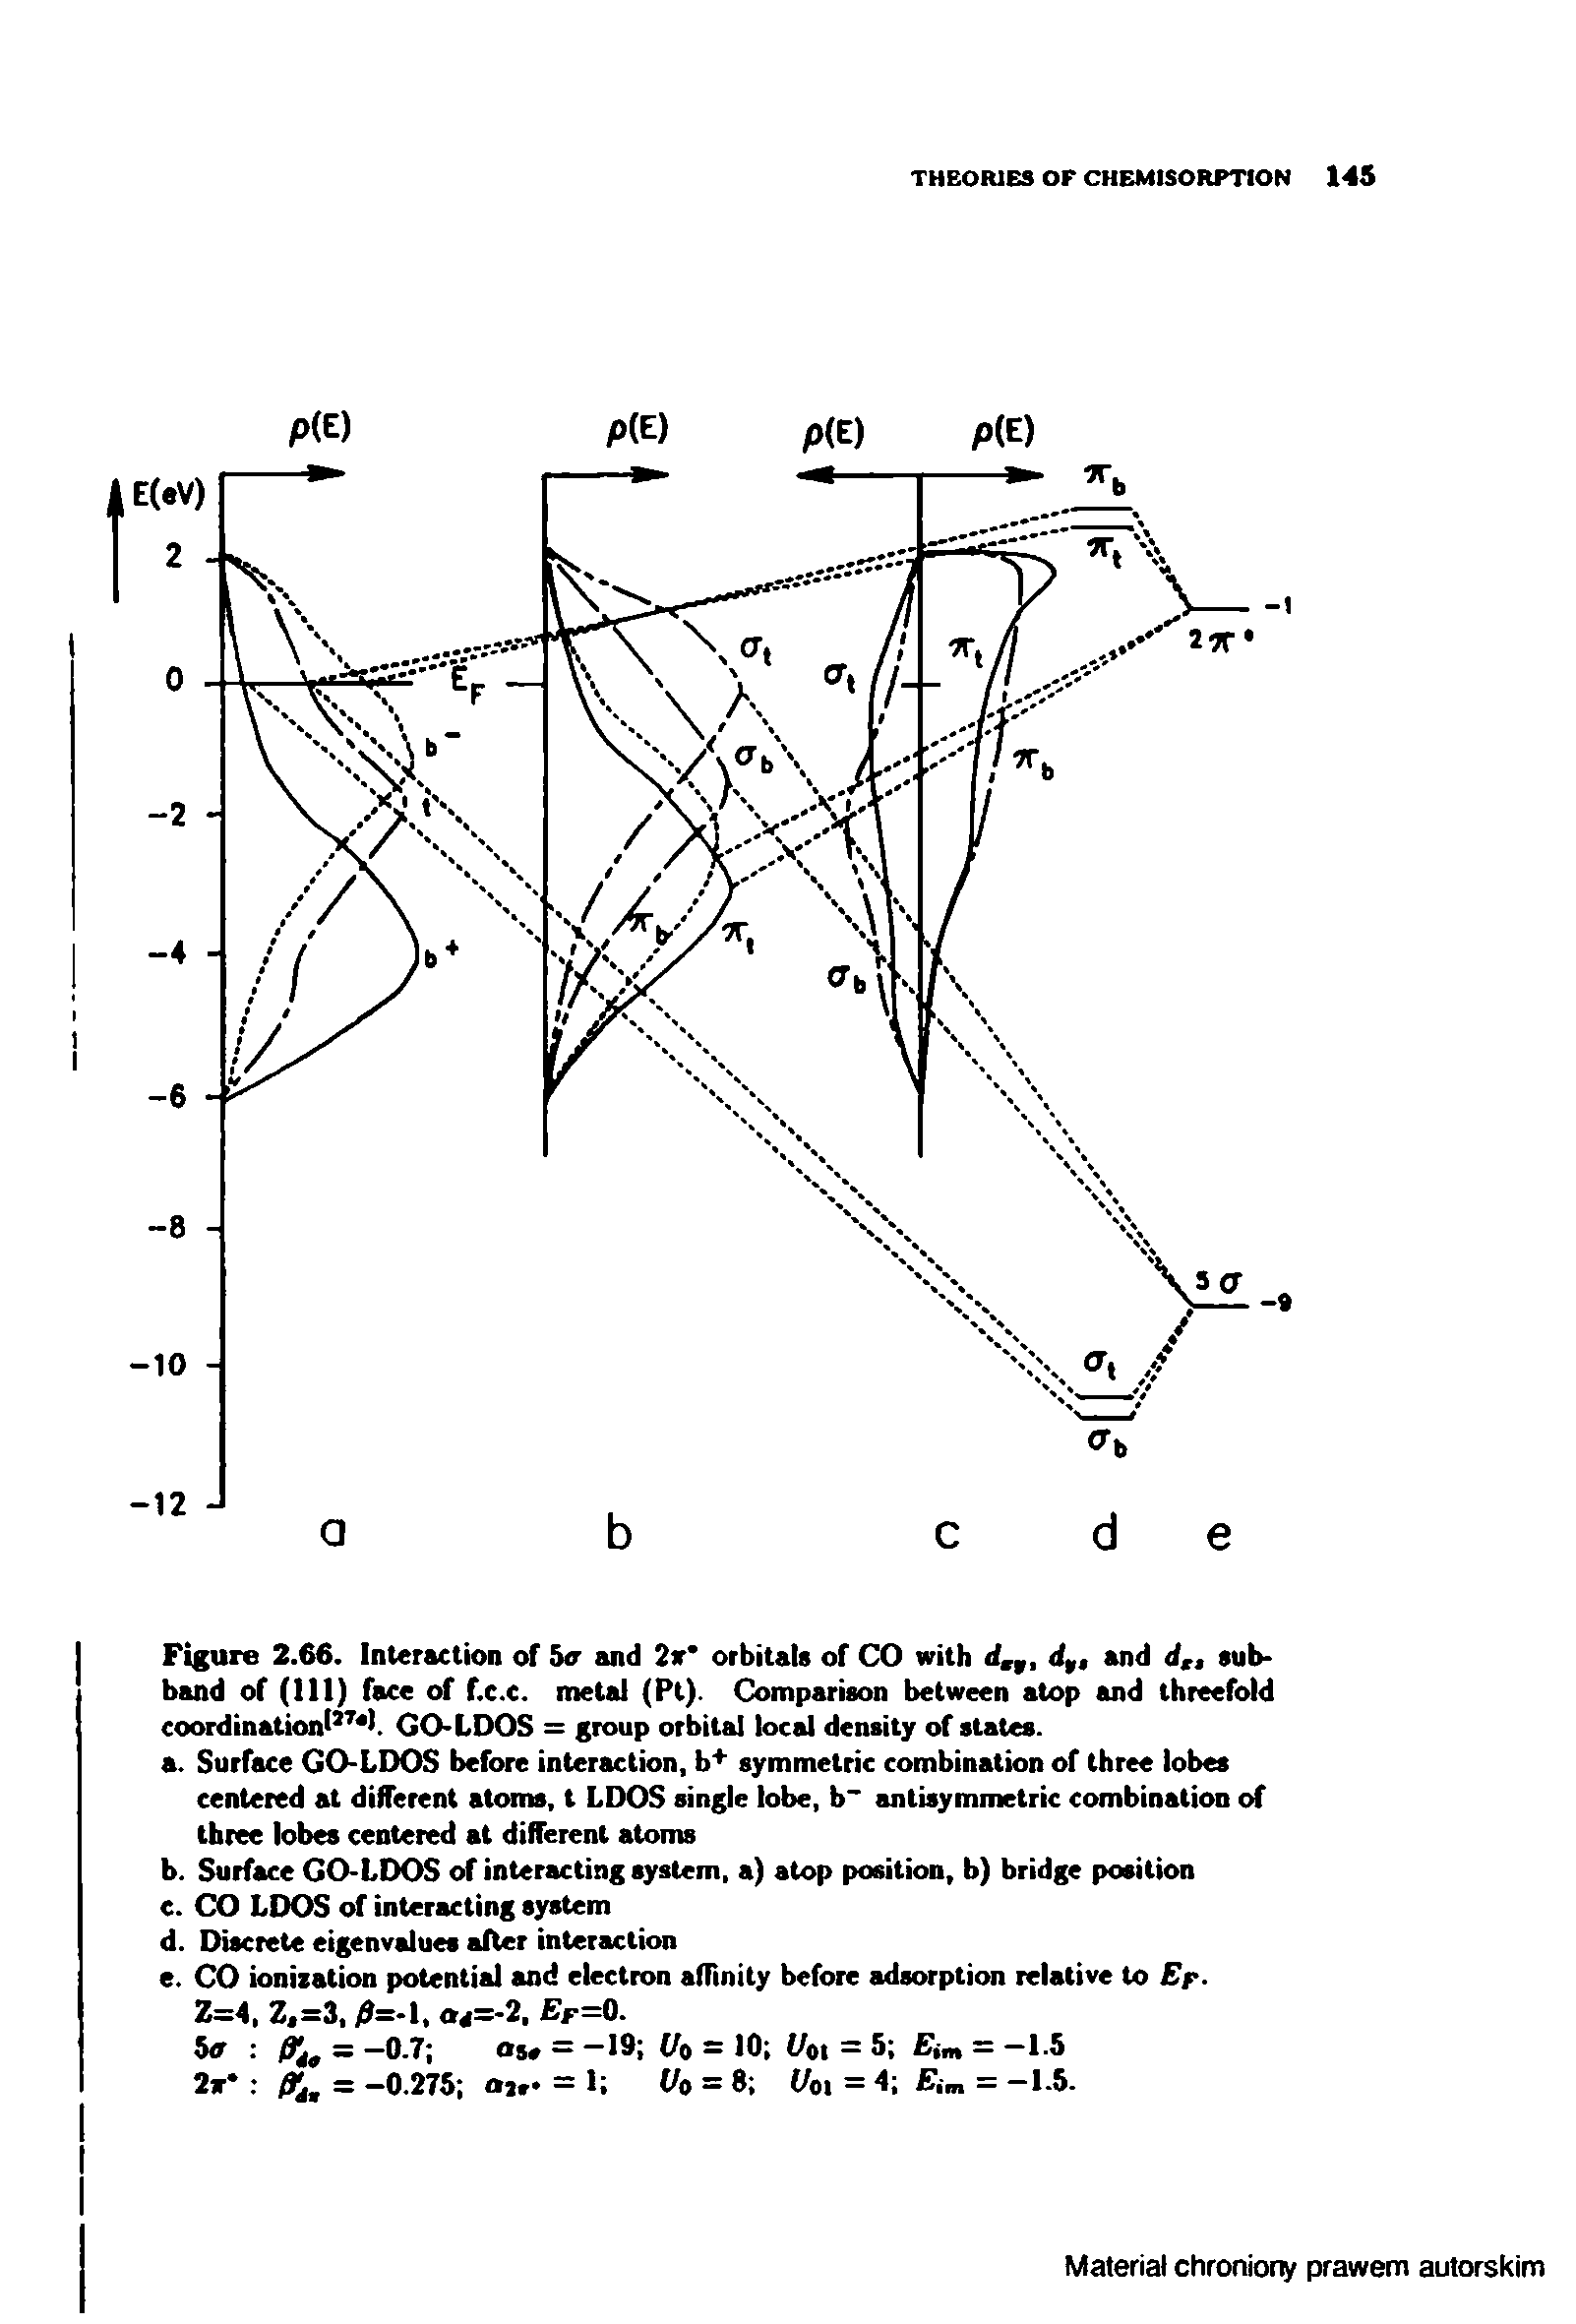 Figure 2.66. Interaction of ba and 2r orbitals of CO with d, and d subband of (111) face of f.c.c. metal (Pt). Comparison between atop and threefold coordinaiiont l GO-LDOS = group orbital local density of states.